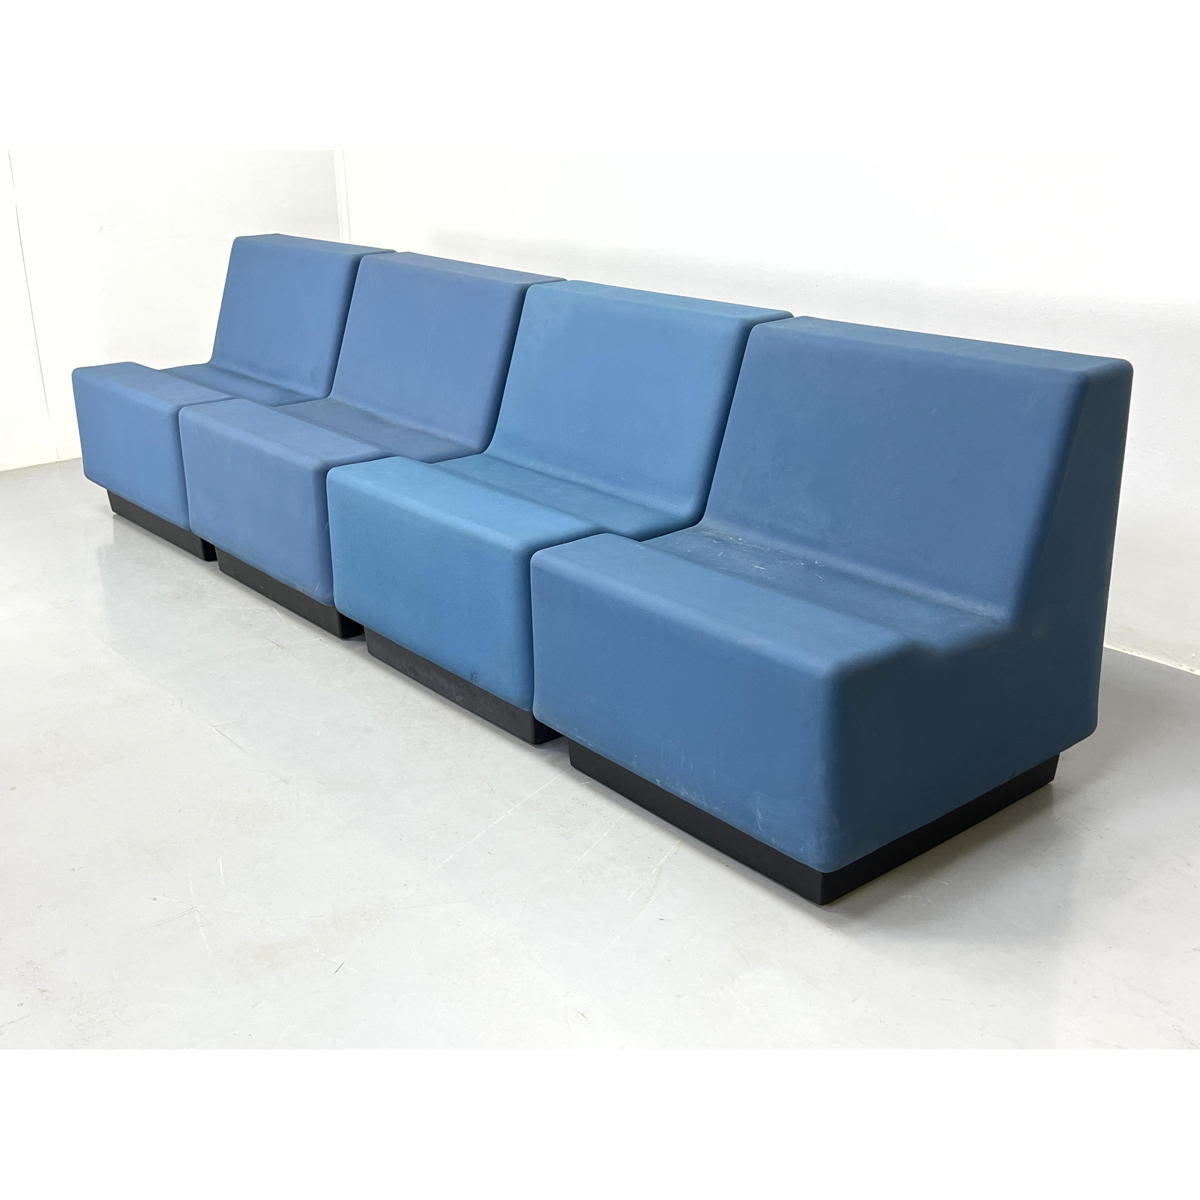 4pc MODUFORM Blue Armless Lounge Chairs.